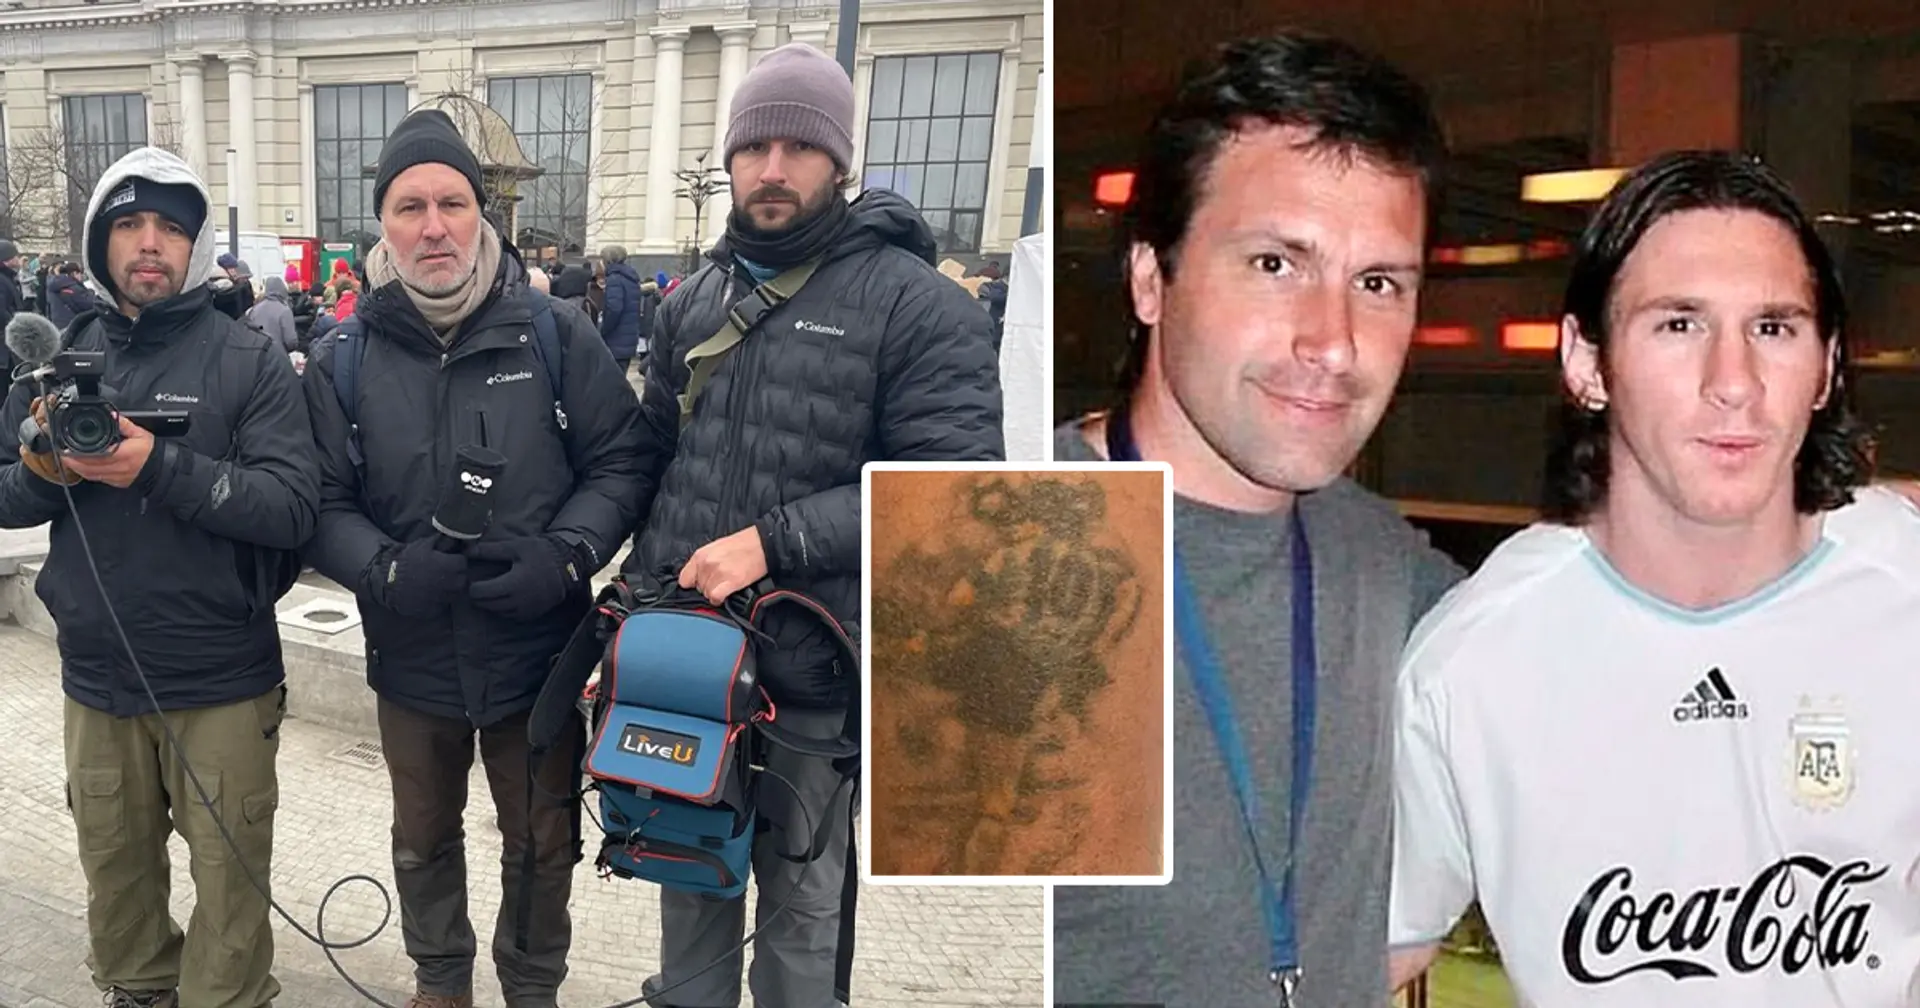 'Messi and Maradona saved our lives': Messi helps save journalists after they were detained by authorities in Ukraine